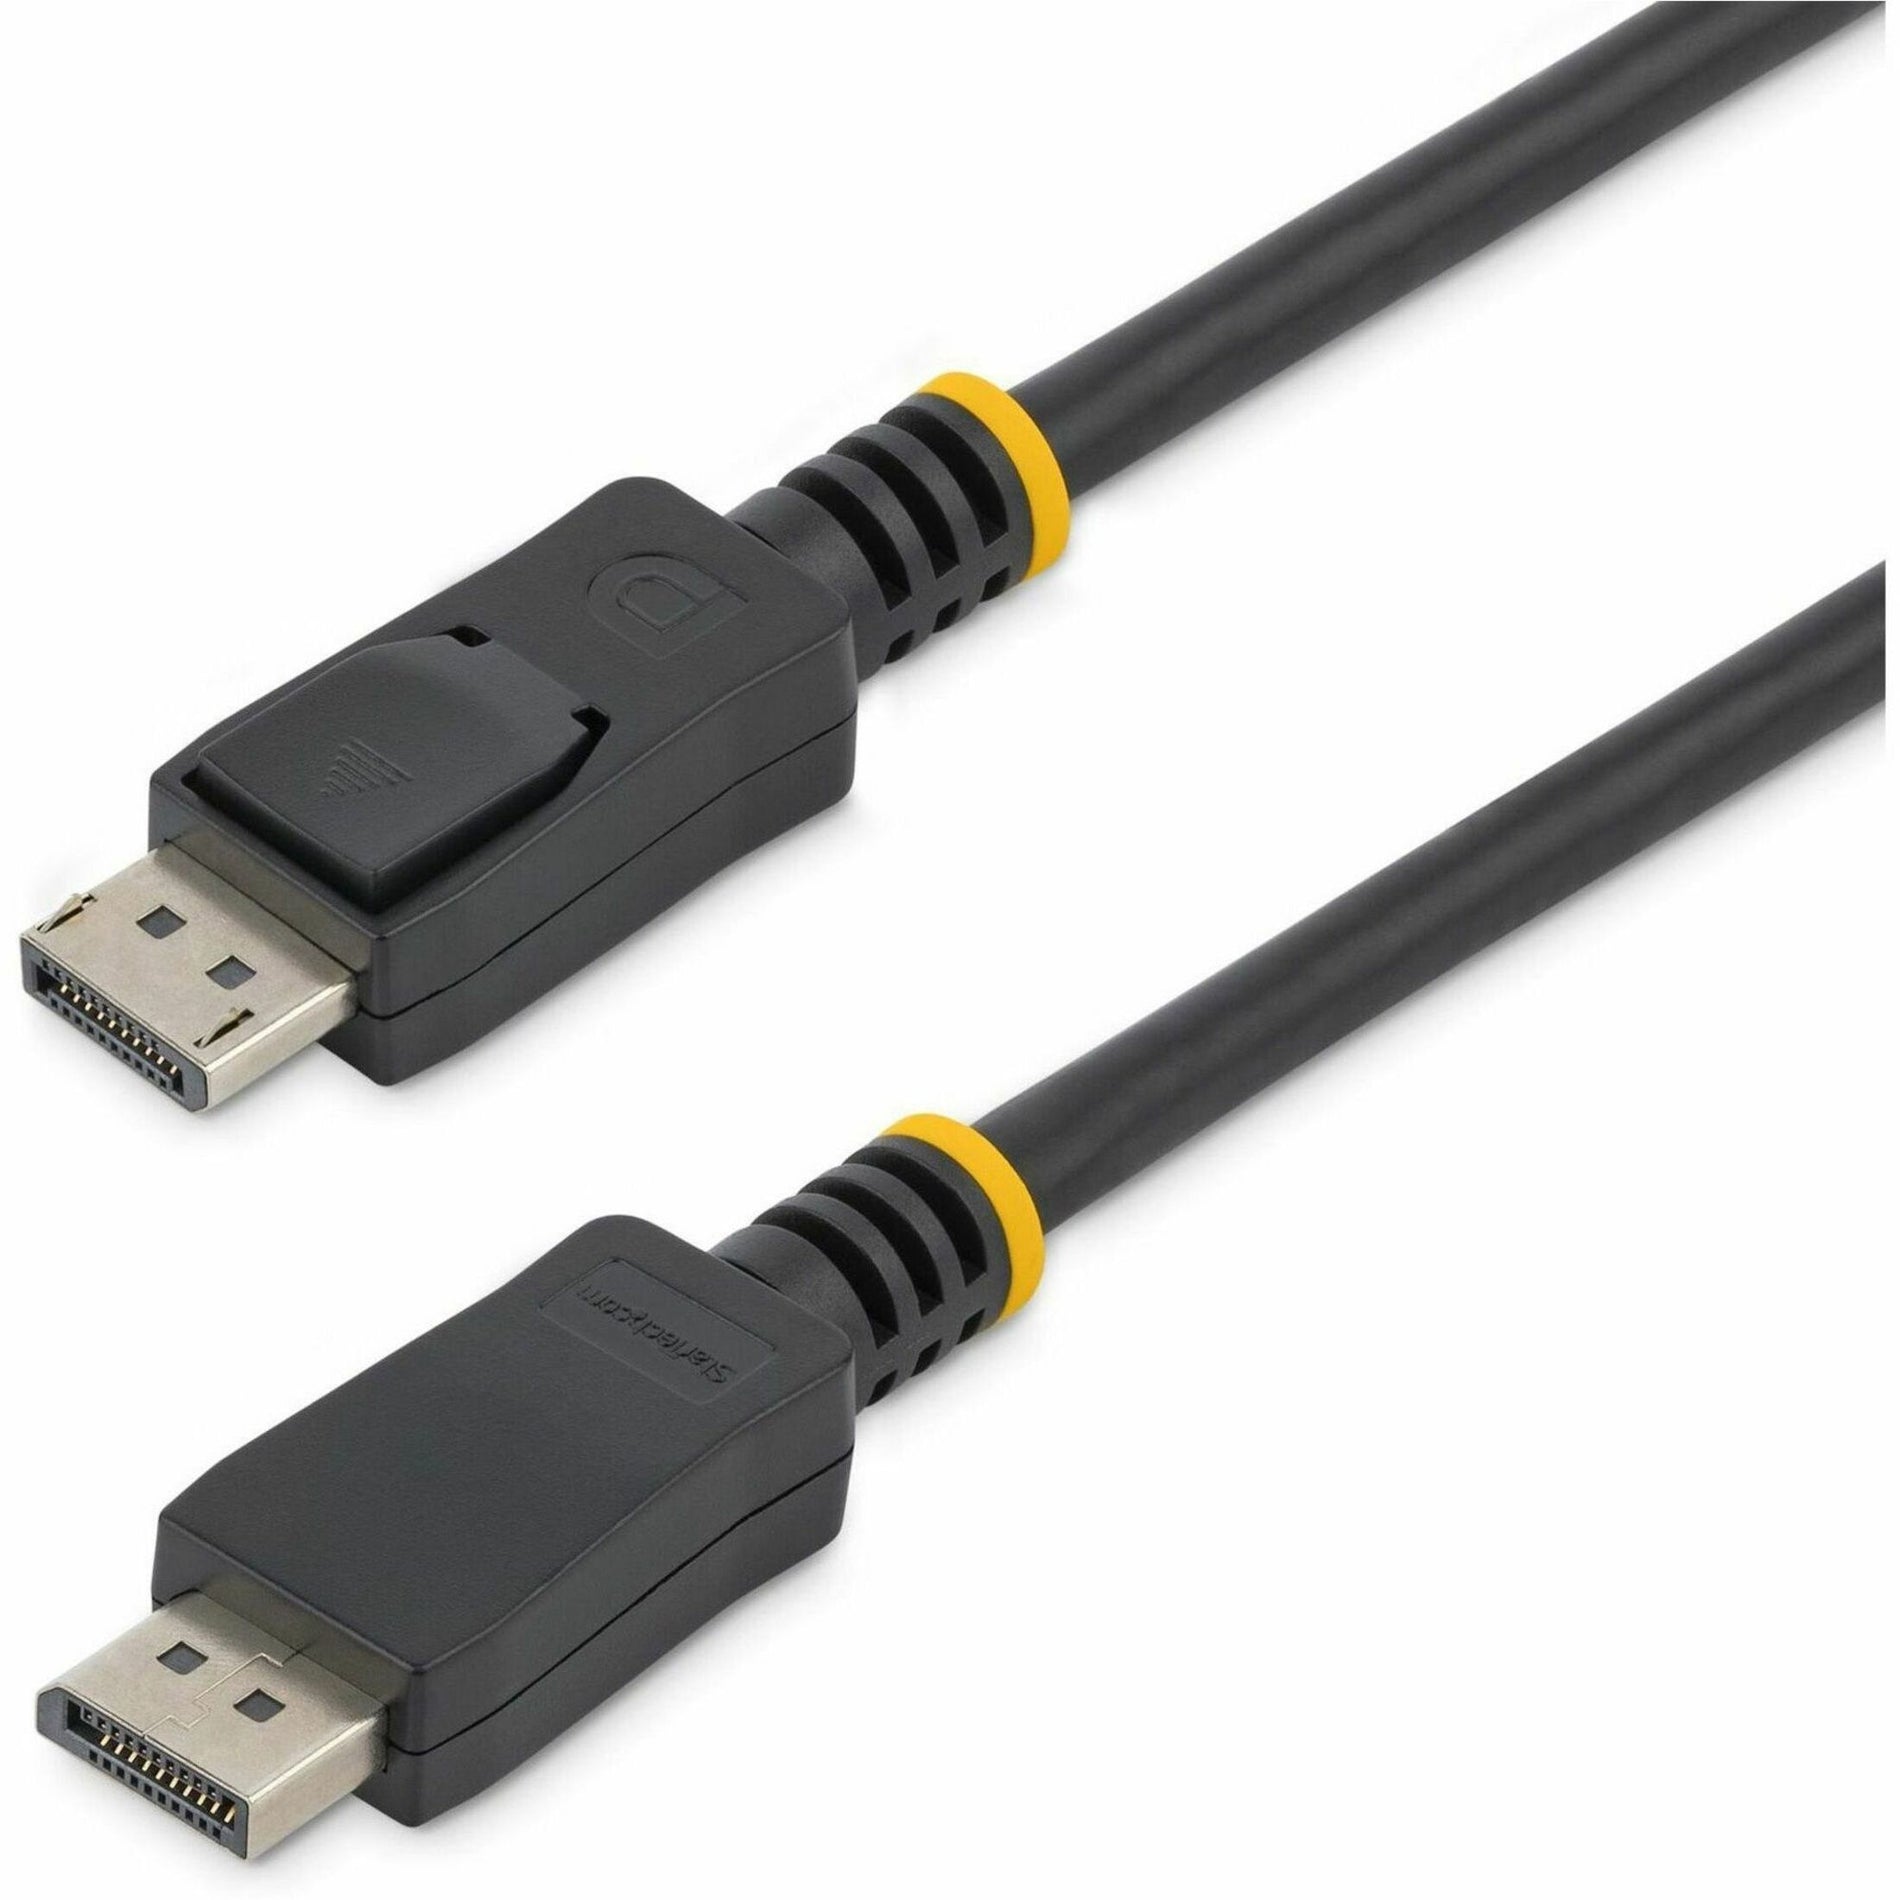 StarTech.com DISPLPORT15L 15 ft Long DisplayPort 1.2 Cable with Latches M/M, 4k Video Cable